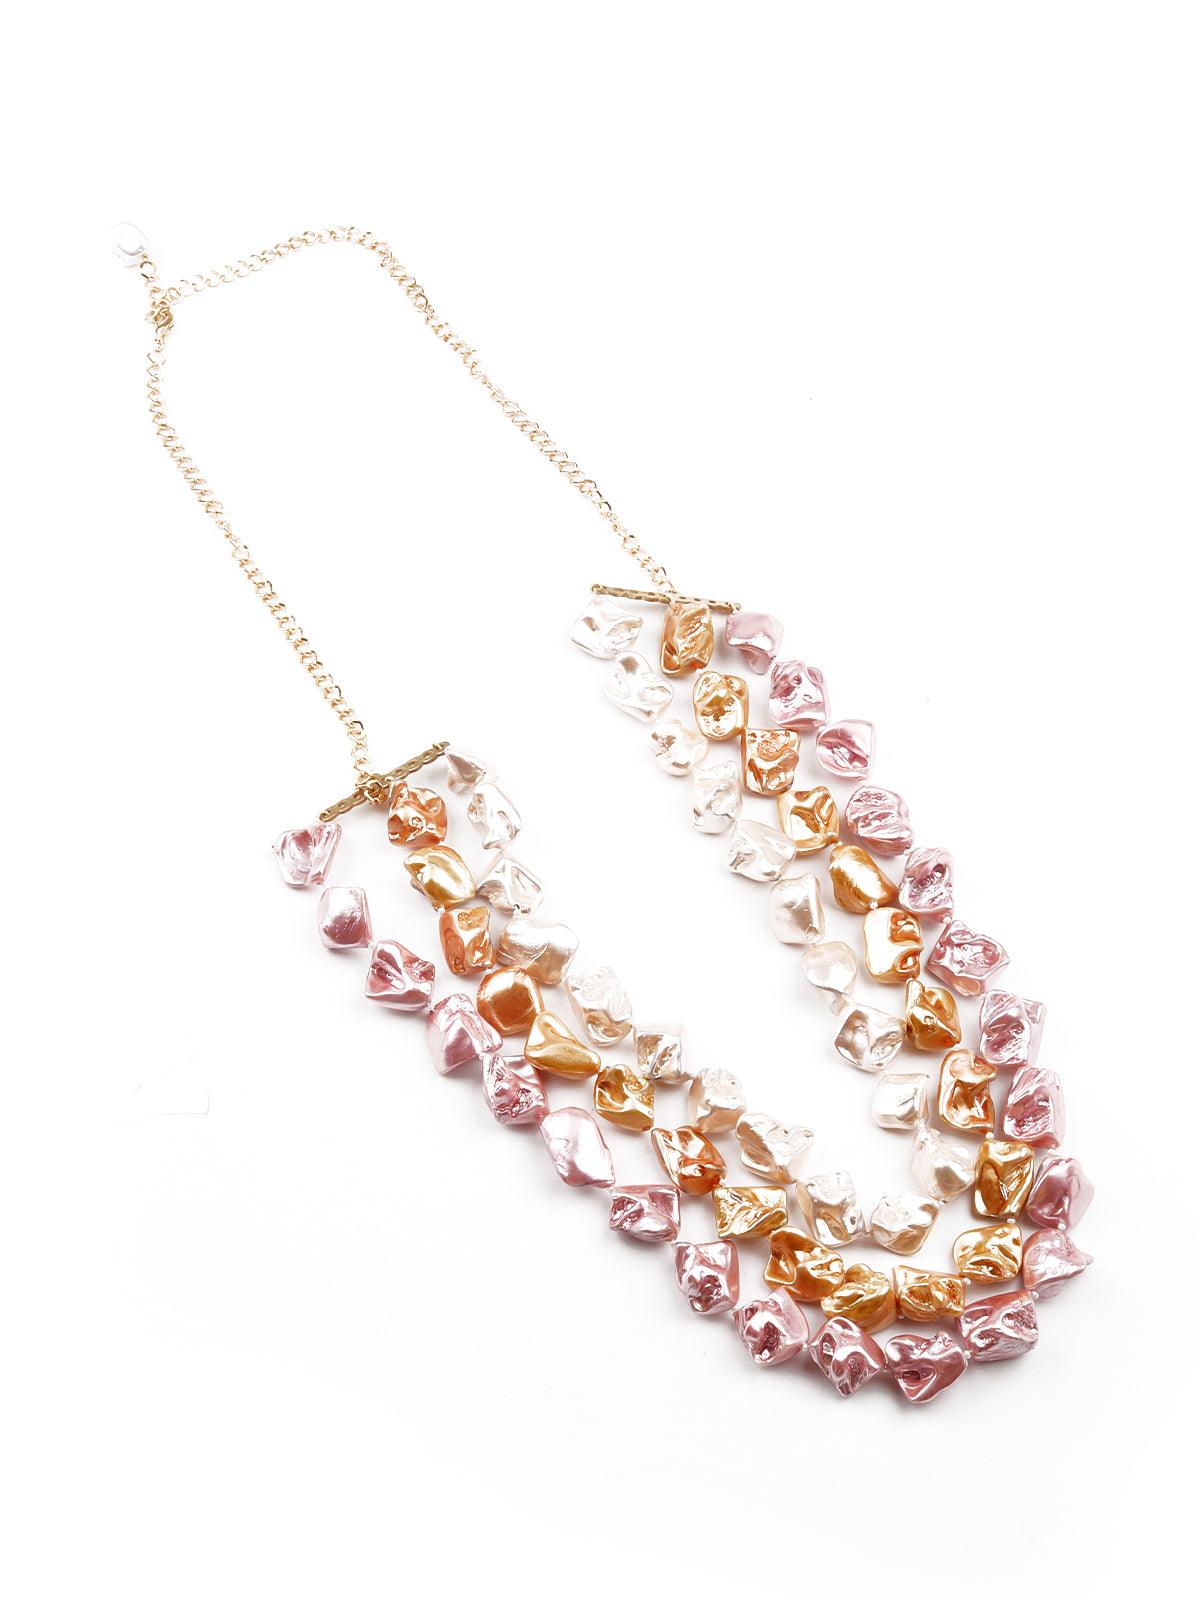 Gorgeous three-layered stoned necklace - Odette